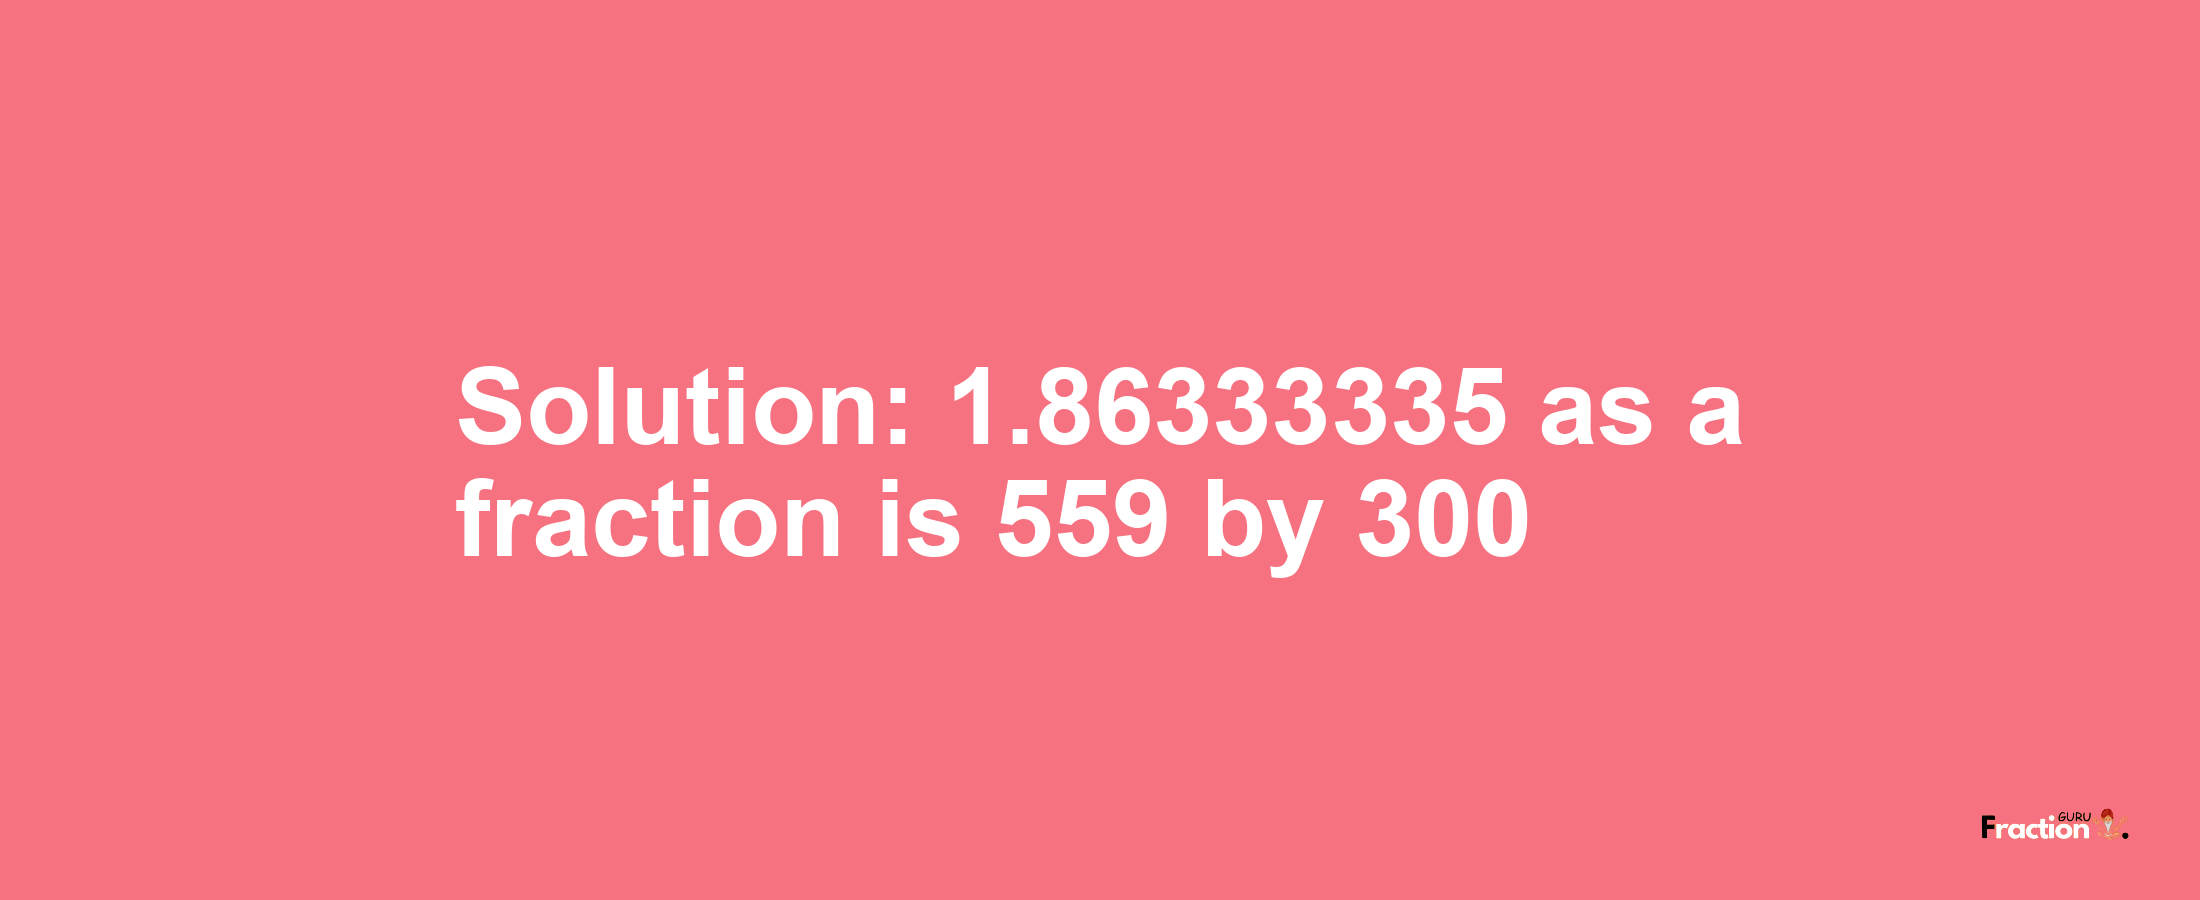 Solution:1.86333335 as a fraction is 559/300